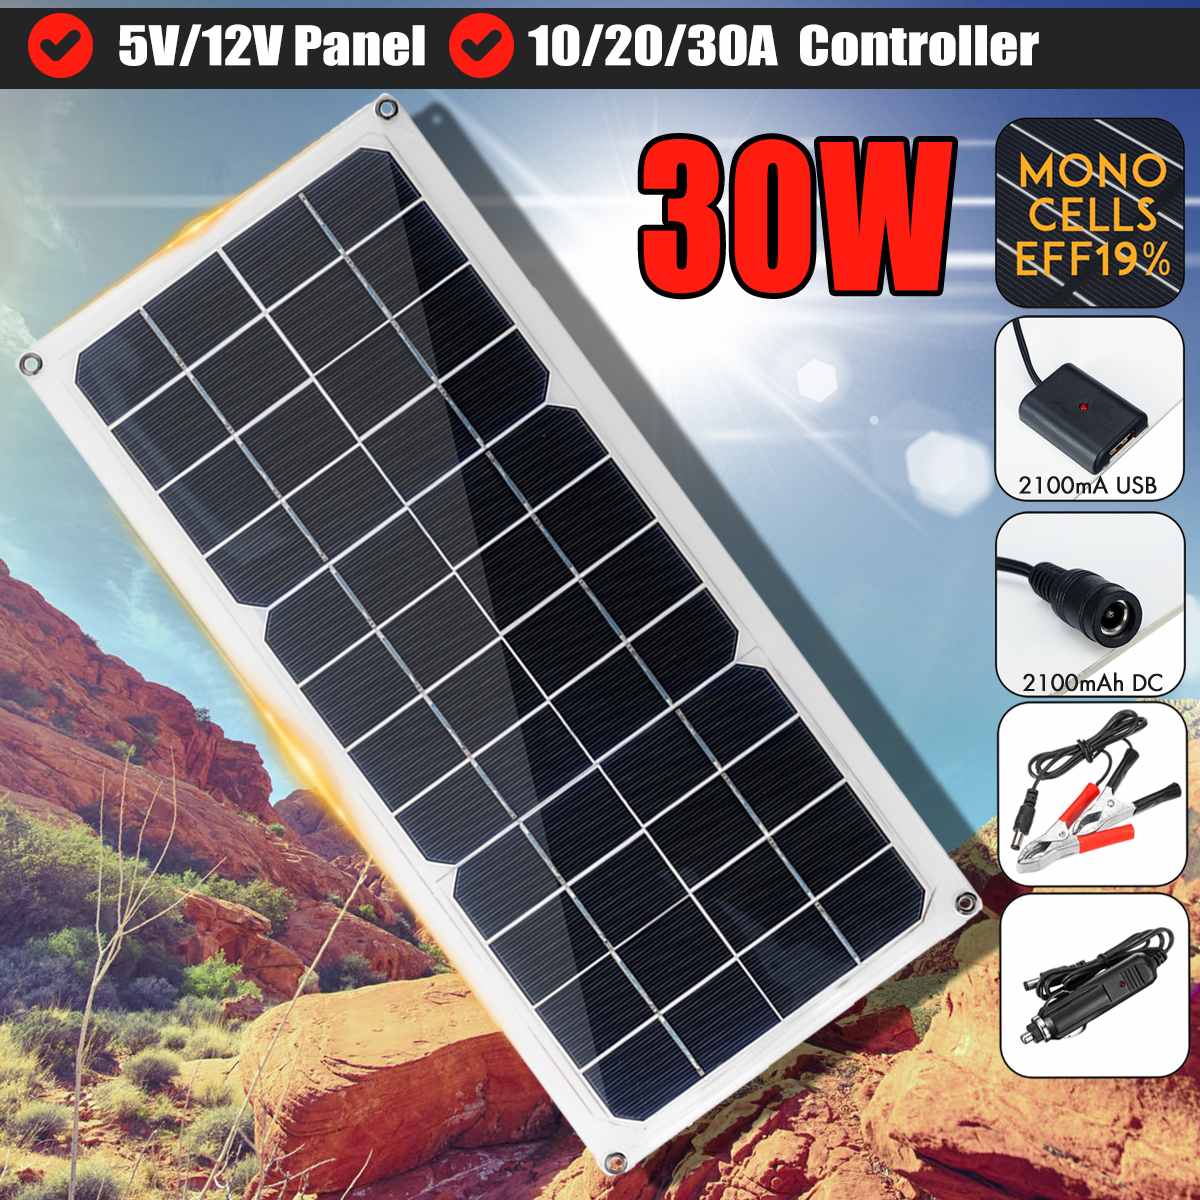 30W-Solar-Panel-12V-Polycrystalline-USB-Power-Portable-Outdoor-Cycle-Camping-Hiking-Travel-Solar-Cel-1934118-2